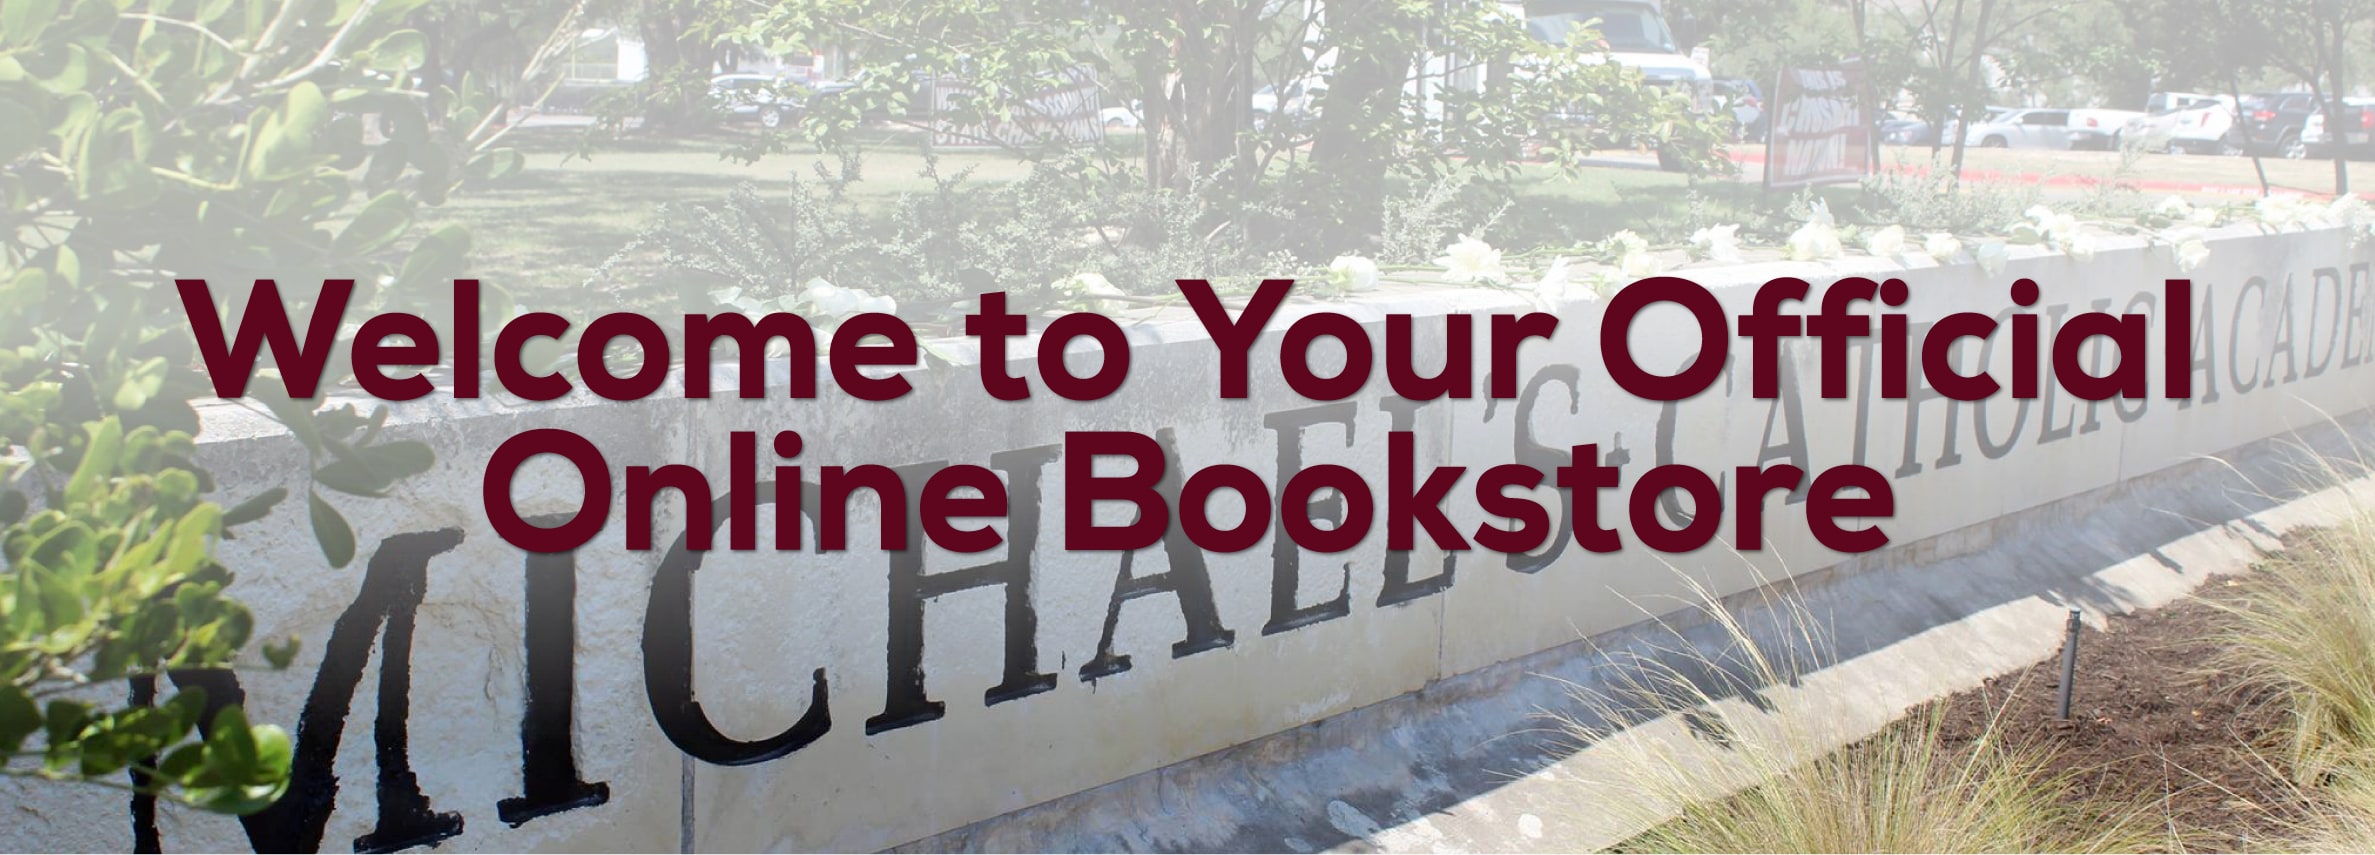 Welcome to Your Official Online Bookstore